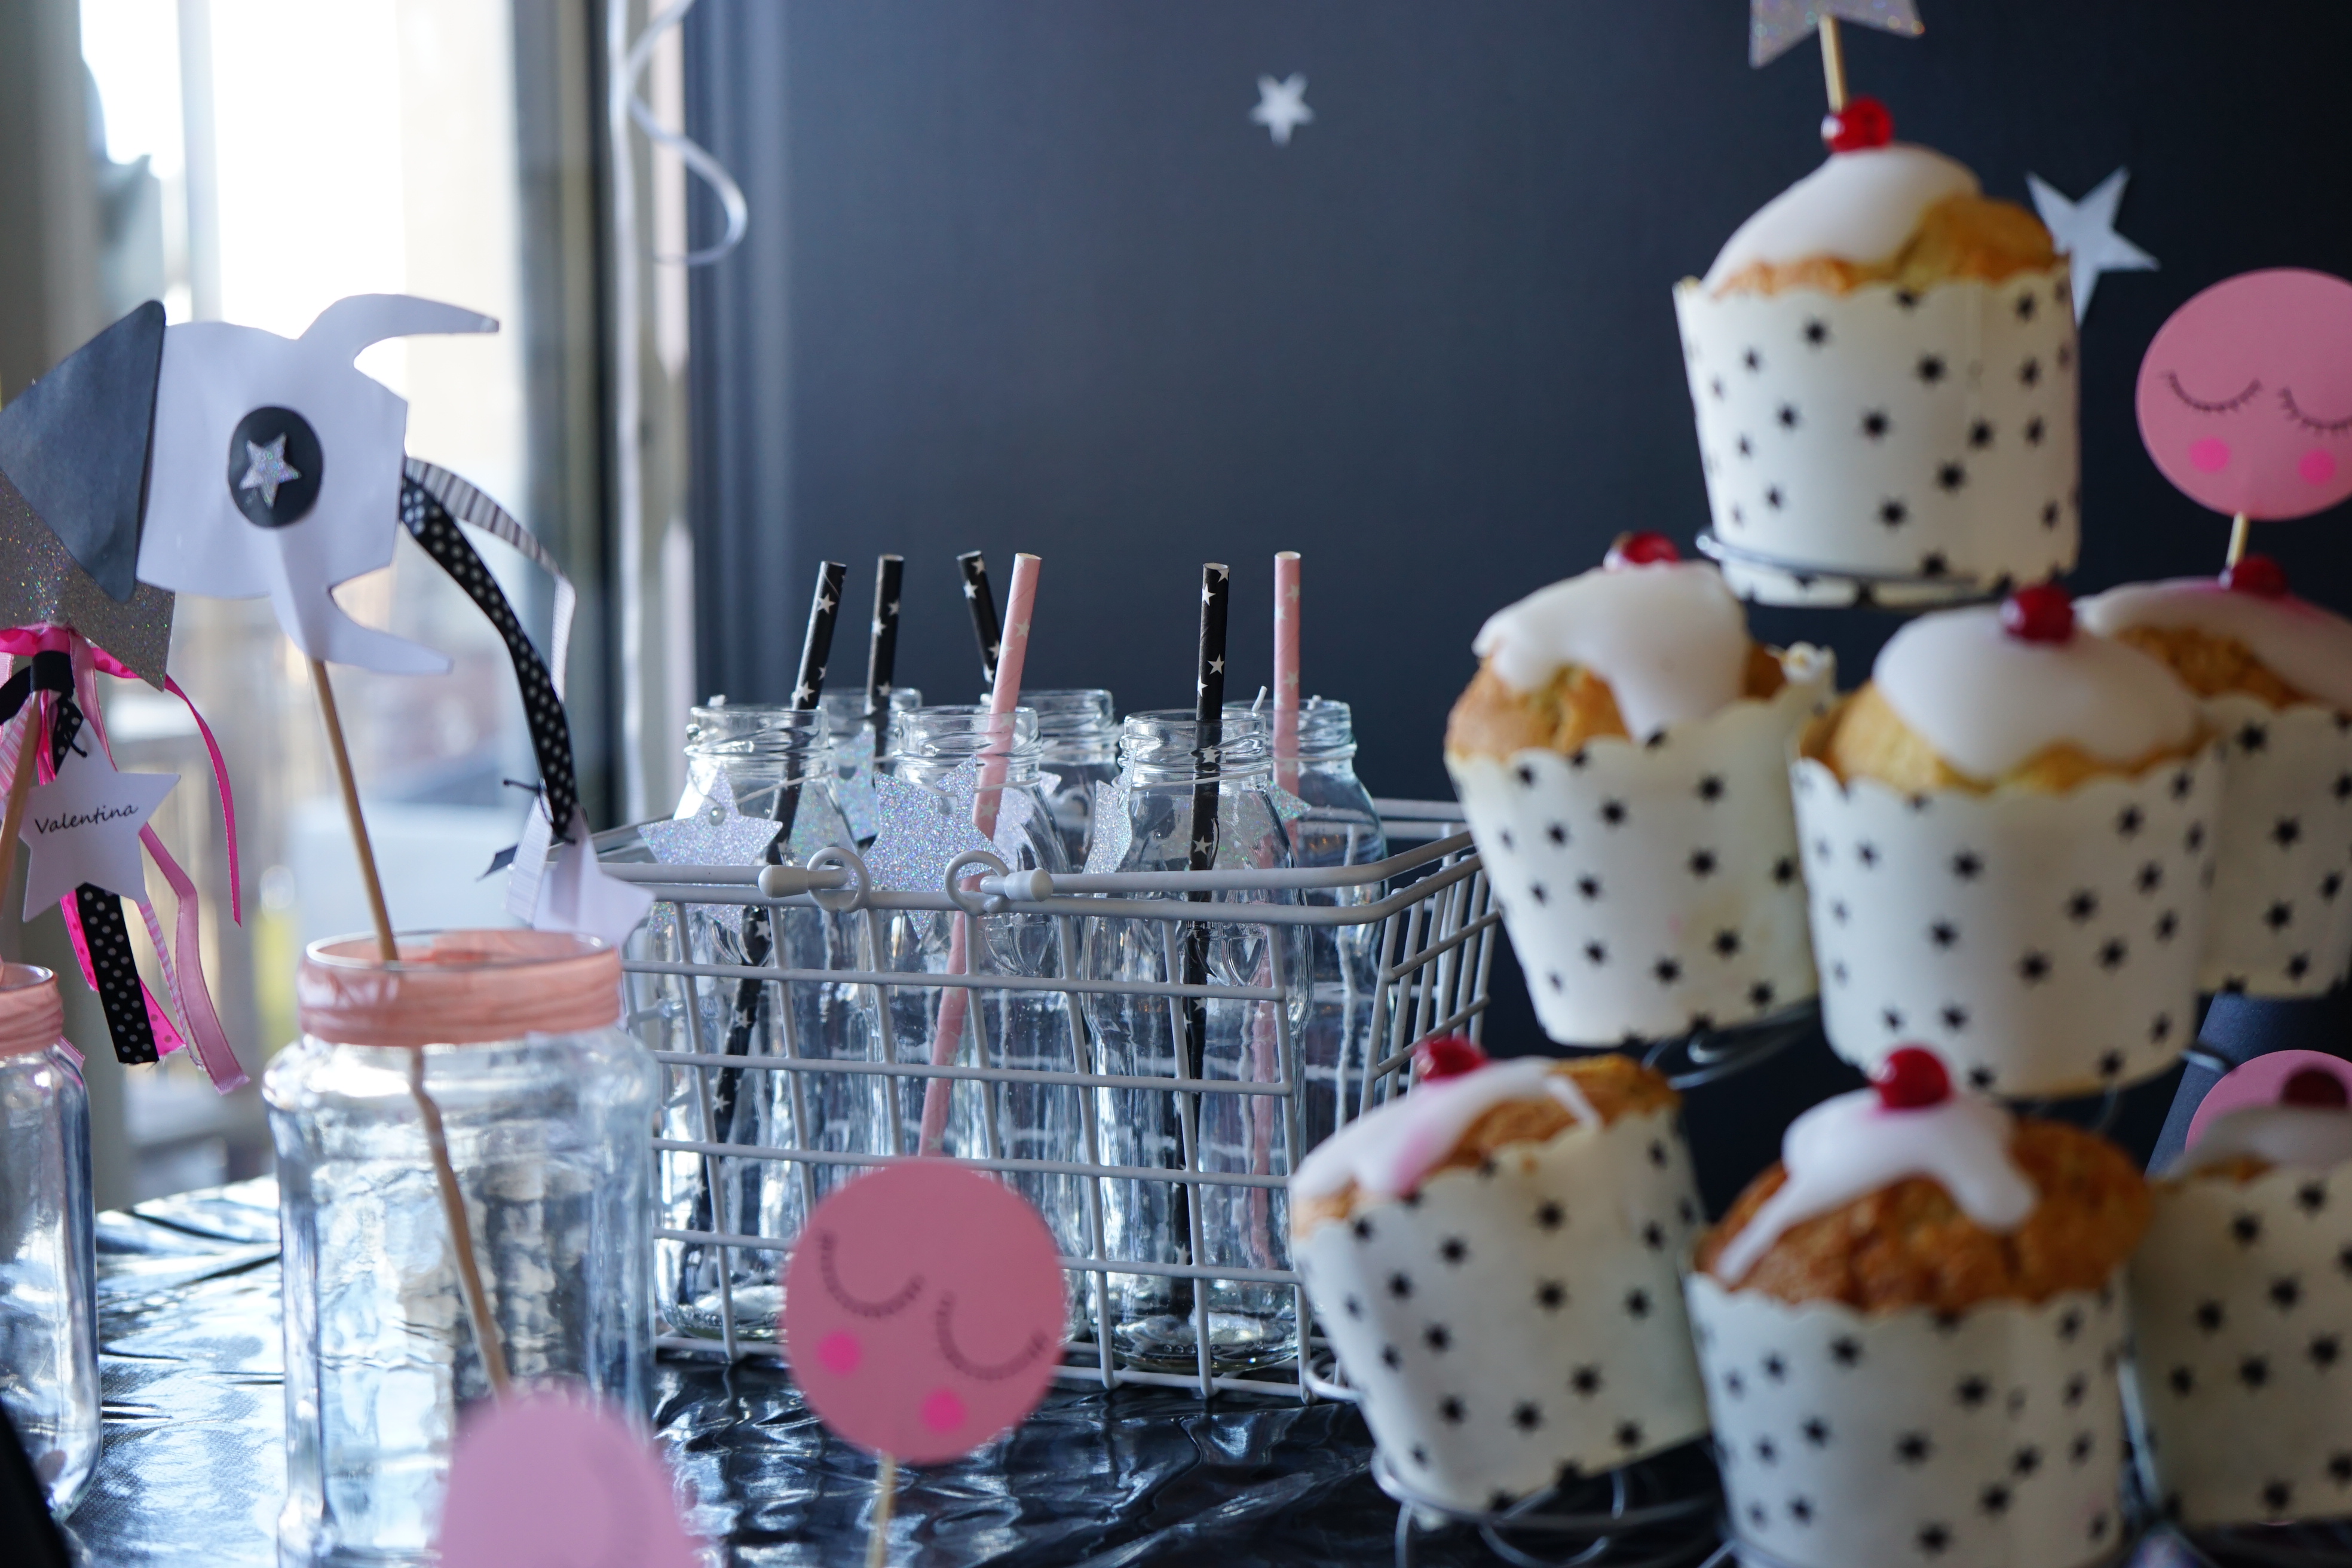 blog_DECOuvrir_design_Love_you_to_the_moon_and_back_party